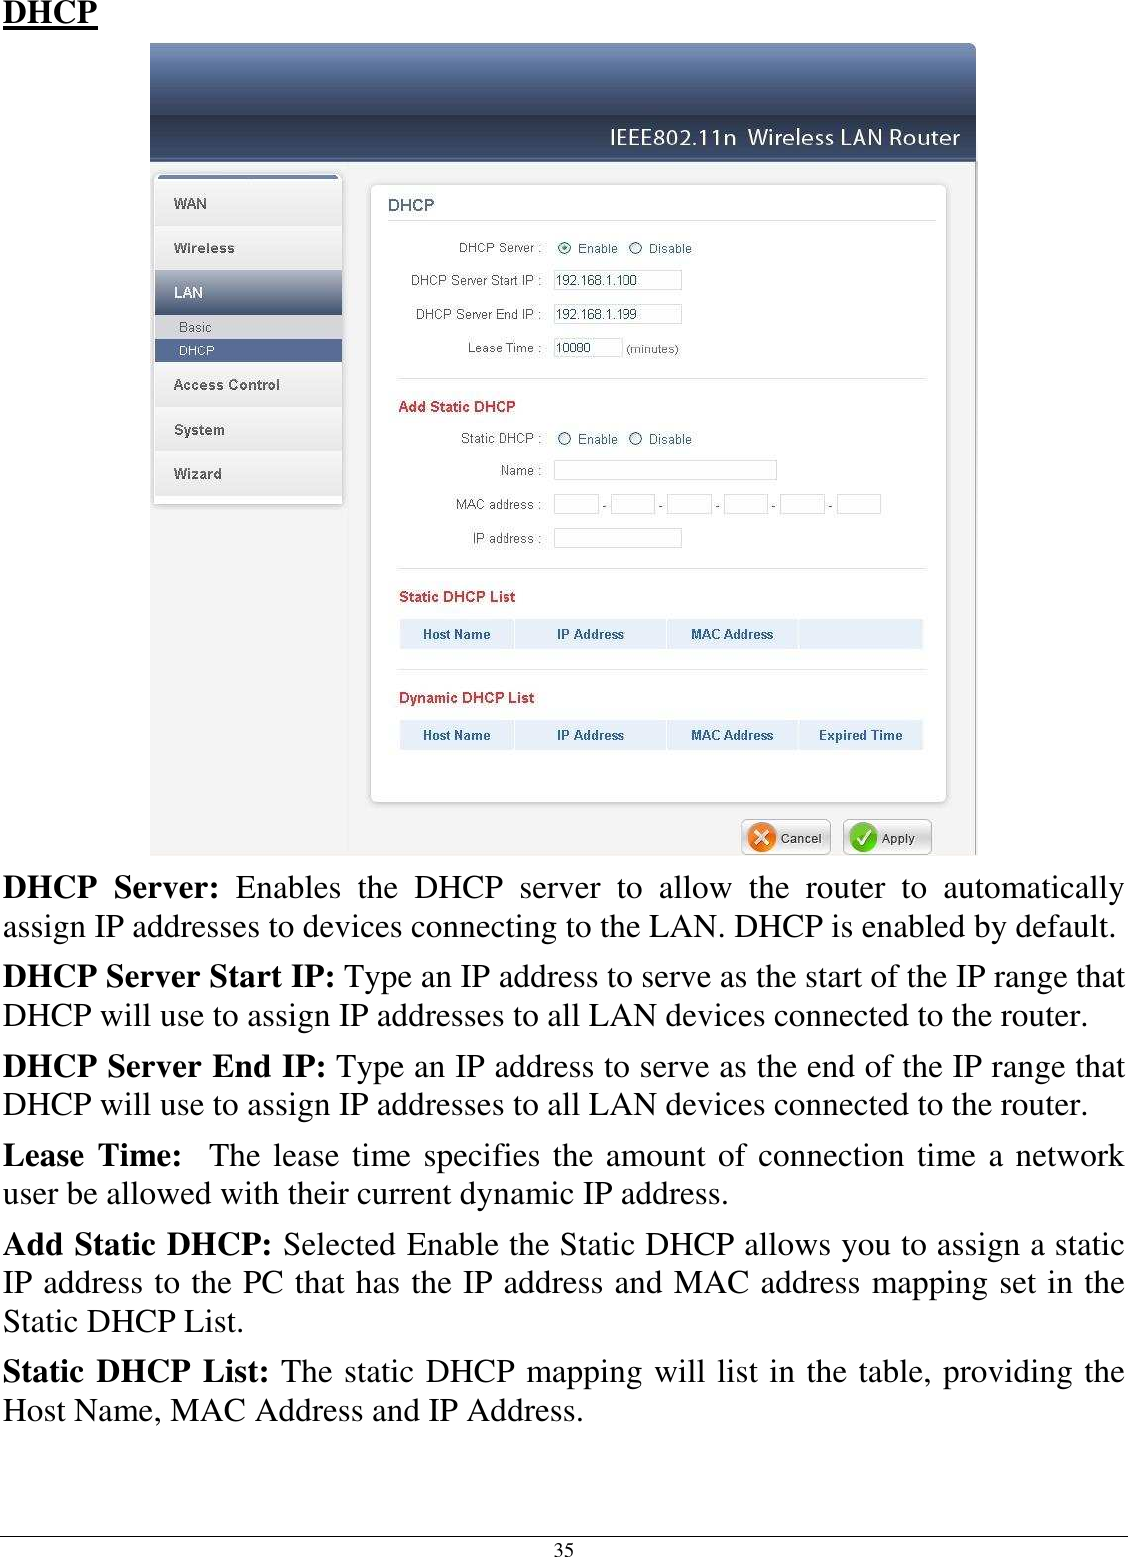 35 DHCP  DHCP  Server:  Enables  the  DHCP  server  to  allow  the  router  to  automatically assign IP addresses to devices connecting to the LAN. DHCP is enabled by default. DHCP Server Start IP: Type an IP address to serve as the start of the IP range that DHCP will use to assign IP addresses to all LAN devices connected to the router. DHCP Server End IP: Type an IP address to serve as the end of the IP range that DHCP will use to assign IP addresses to all LAN devices connected to the router. Lease Time:  The lease time specifies the amount of connection time a network user be allowed with their current dynamic IP address. Add Static DHCP: Selected Enable the Static DHCP allows you to assign a static IP address to the PC that has the IP address and MAC address mapping set in the Static DHCP List. Static DHCP List: The static DHCP mapping will list in the table, providing the Host Name, MAC Address and IP Address.  